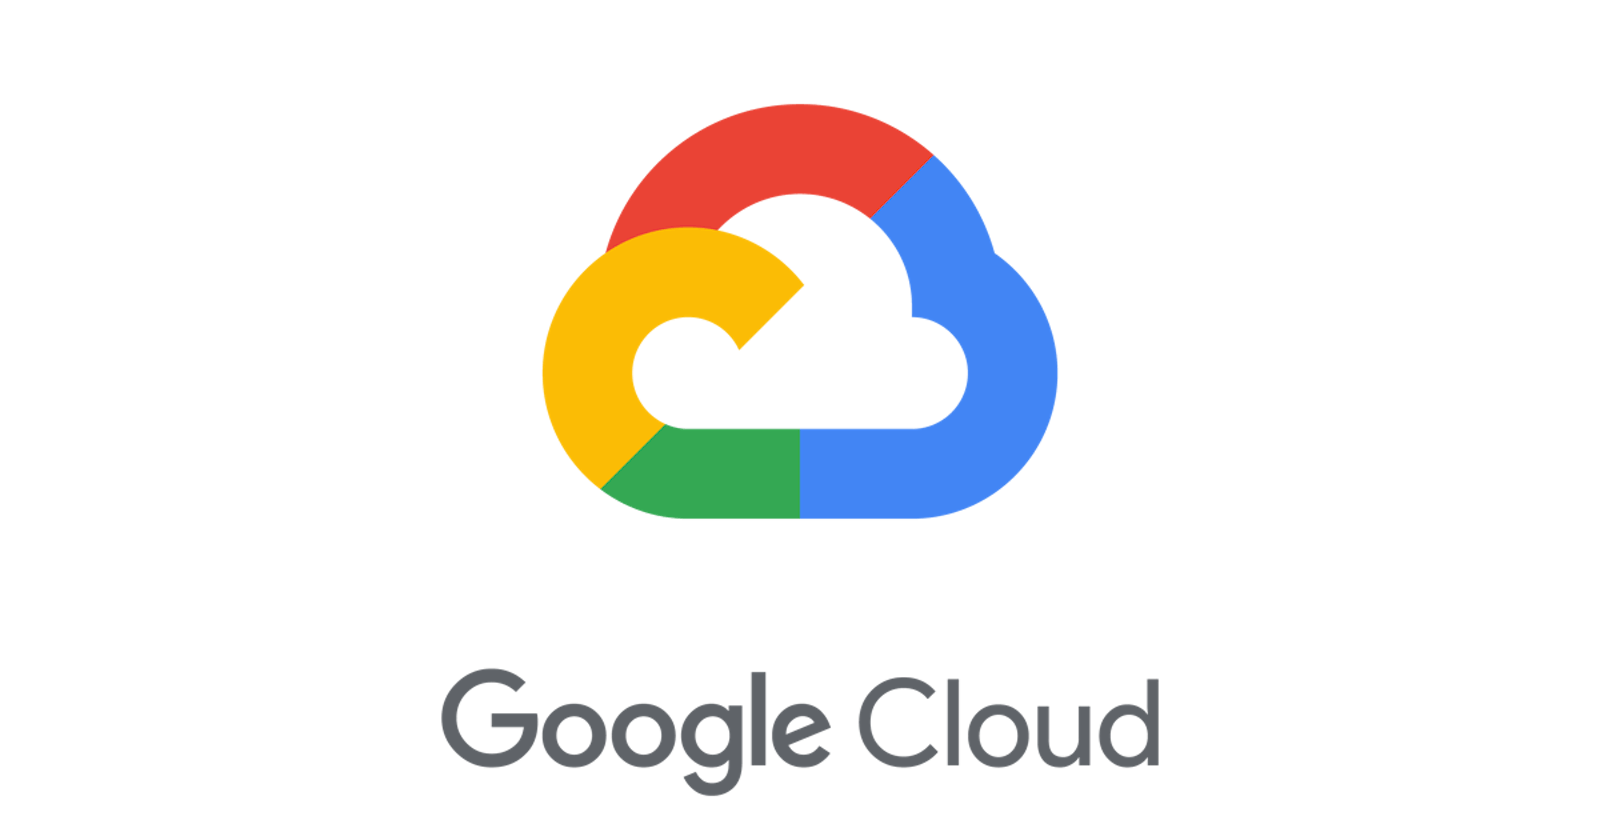 chapter 1.1   Creating Your Personal Google Cloud Platform (GCP) Account and Setting Up a Virtual Machine (VM)